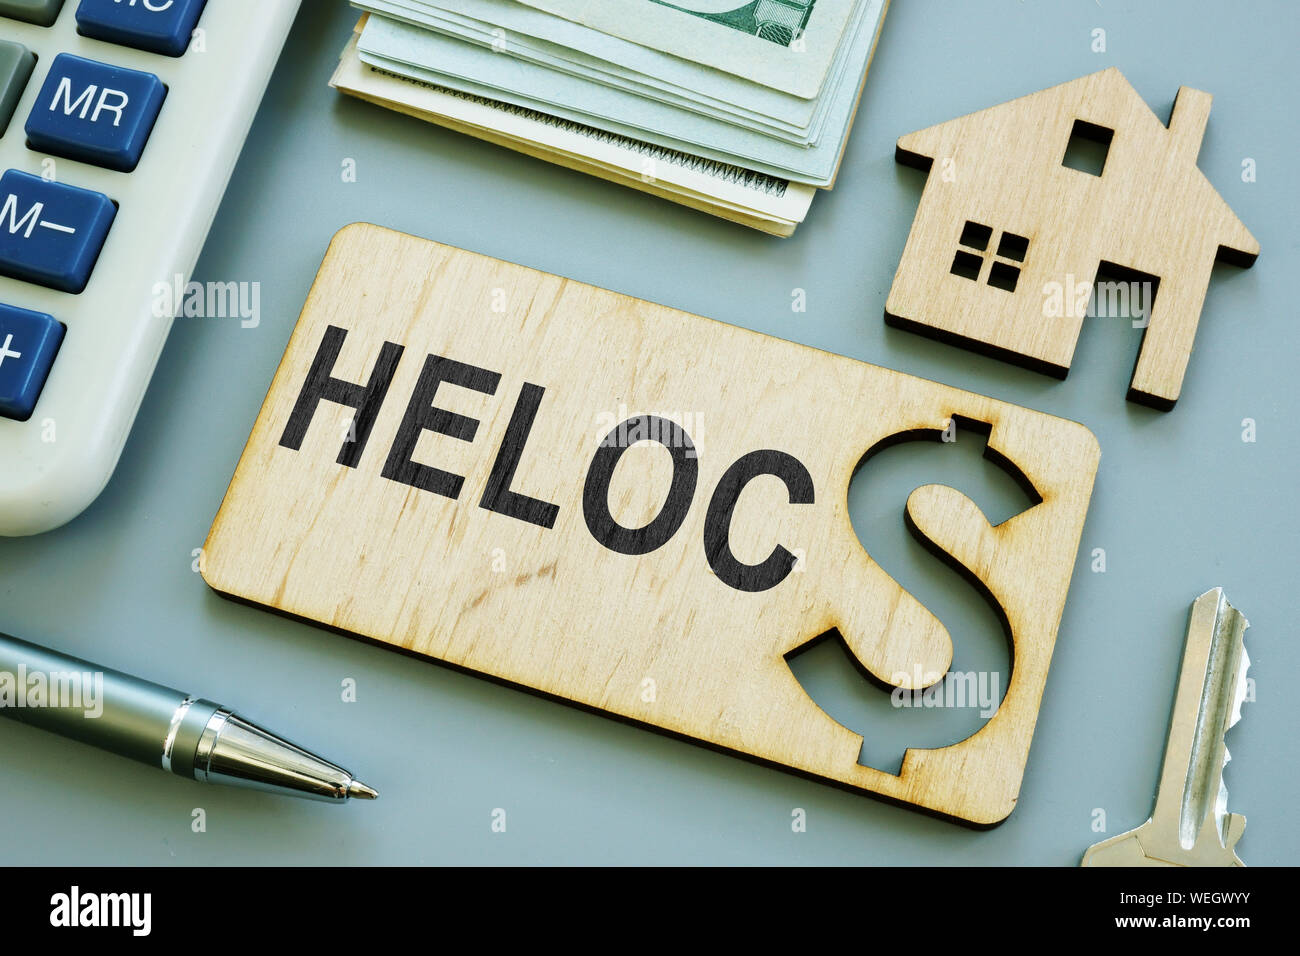 Wooden plank with sign HELOC Home Equity Line of Credit. Stock Photo